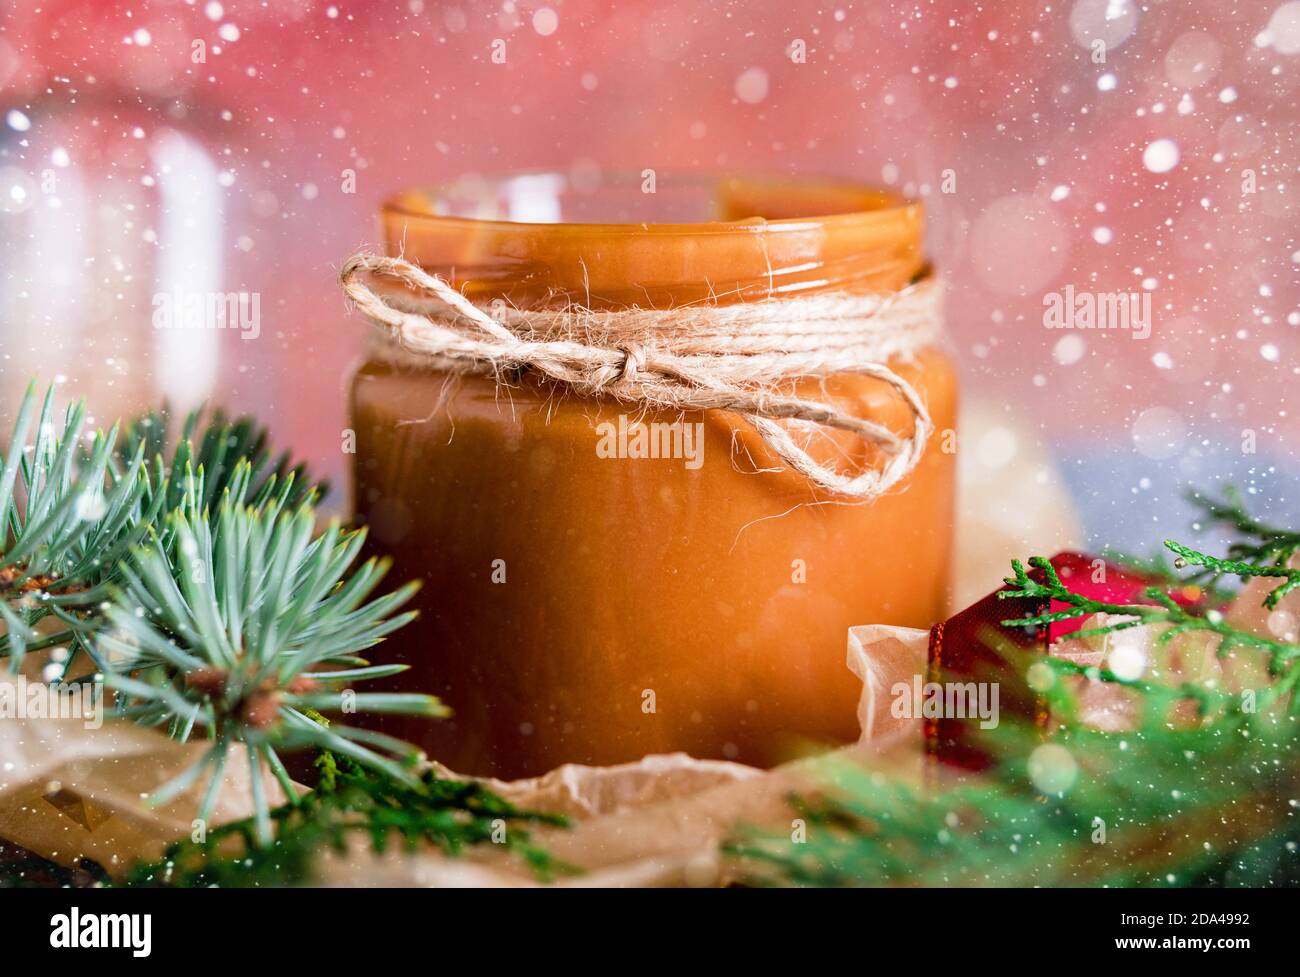 A small jar with boiled homemade condensed milk. Shortbread Christmas cookies, lights, sprigs of spruce, bumps. New Year's content. Stock Photo